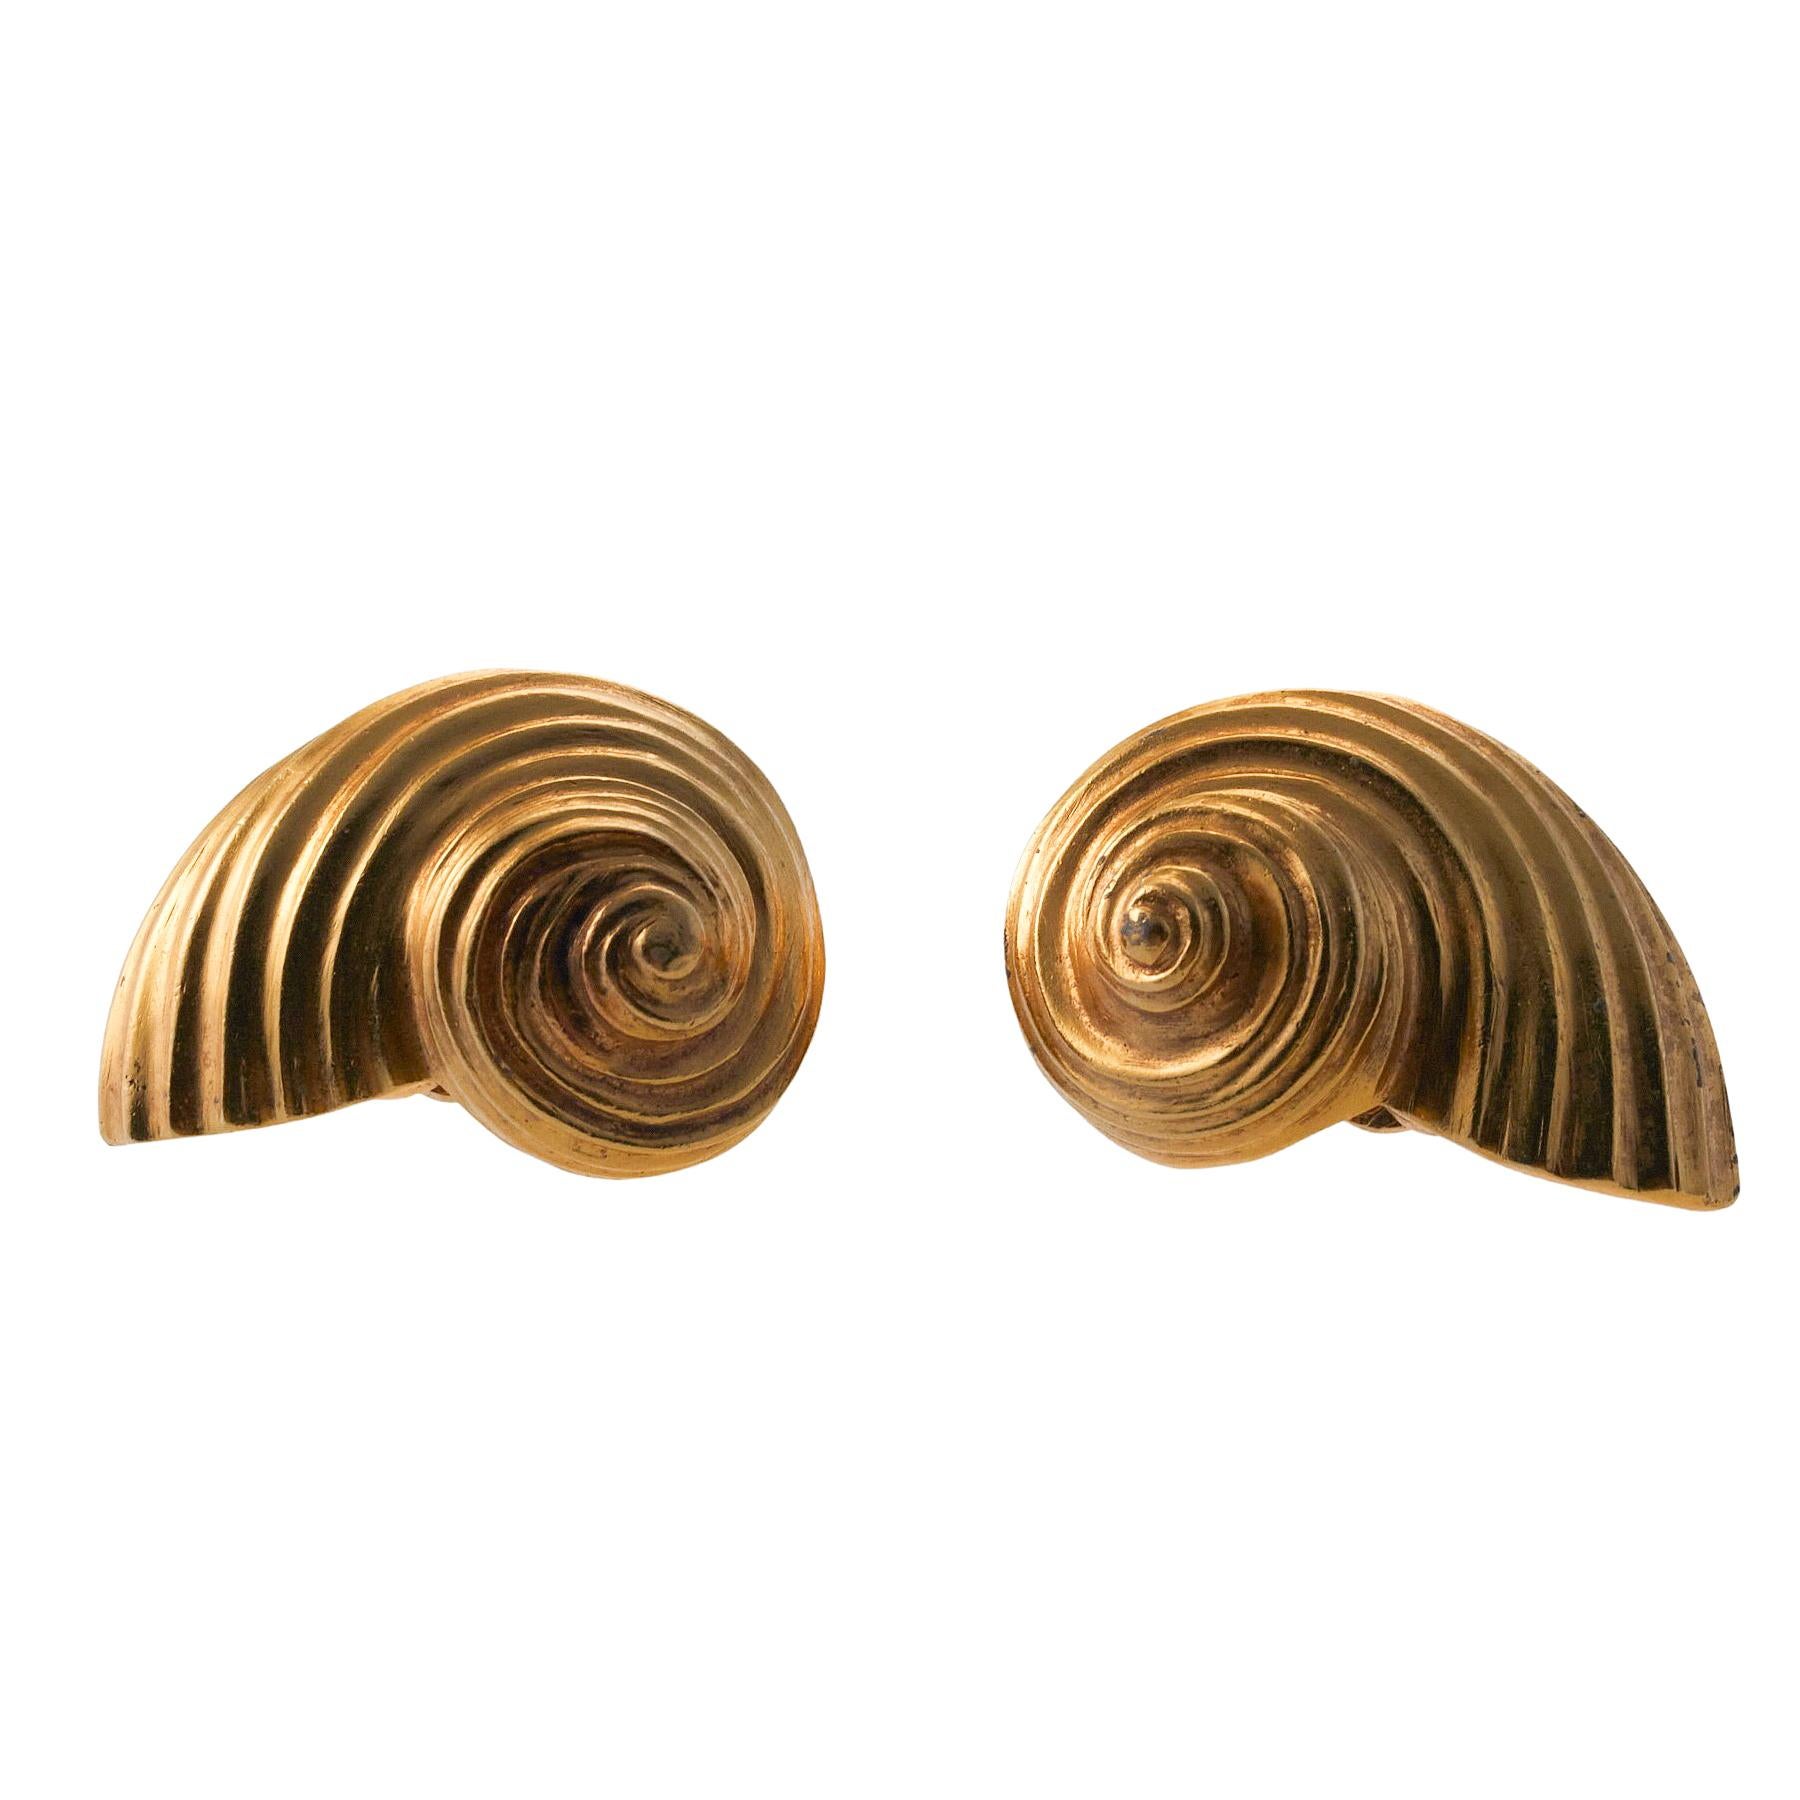 Pair of 18k gold shell motif earrings by Ilias Lalaounis of Greece.


MATERIAL: 18k Gold 
GEMSTONES: None
DIMENSIONS: Earrings are 31mm x 23mm.
MARKED/TESTED: 750, Lalaounis mark, Greece.
WEIGHT:  22.9 grams